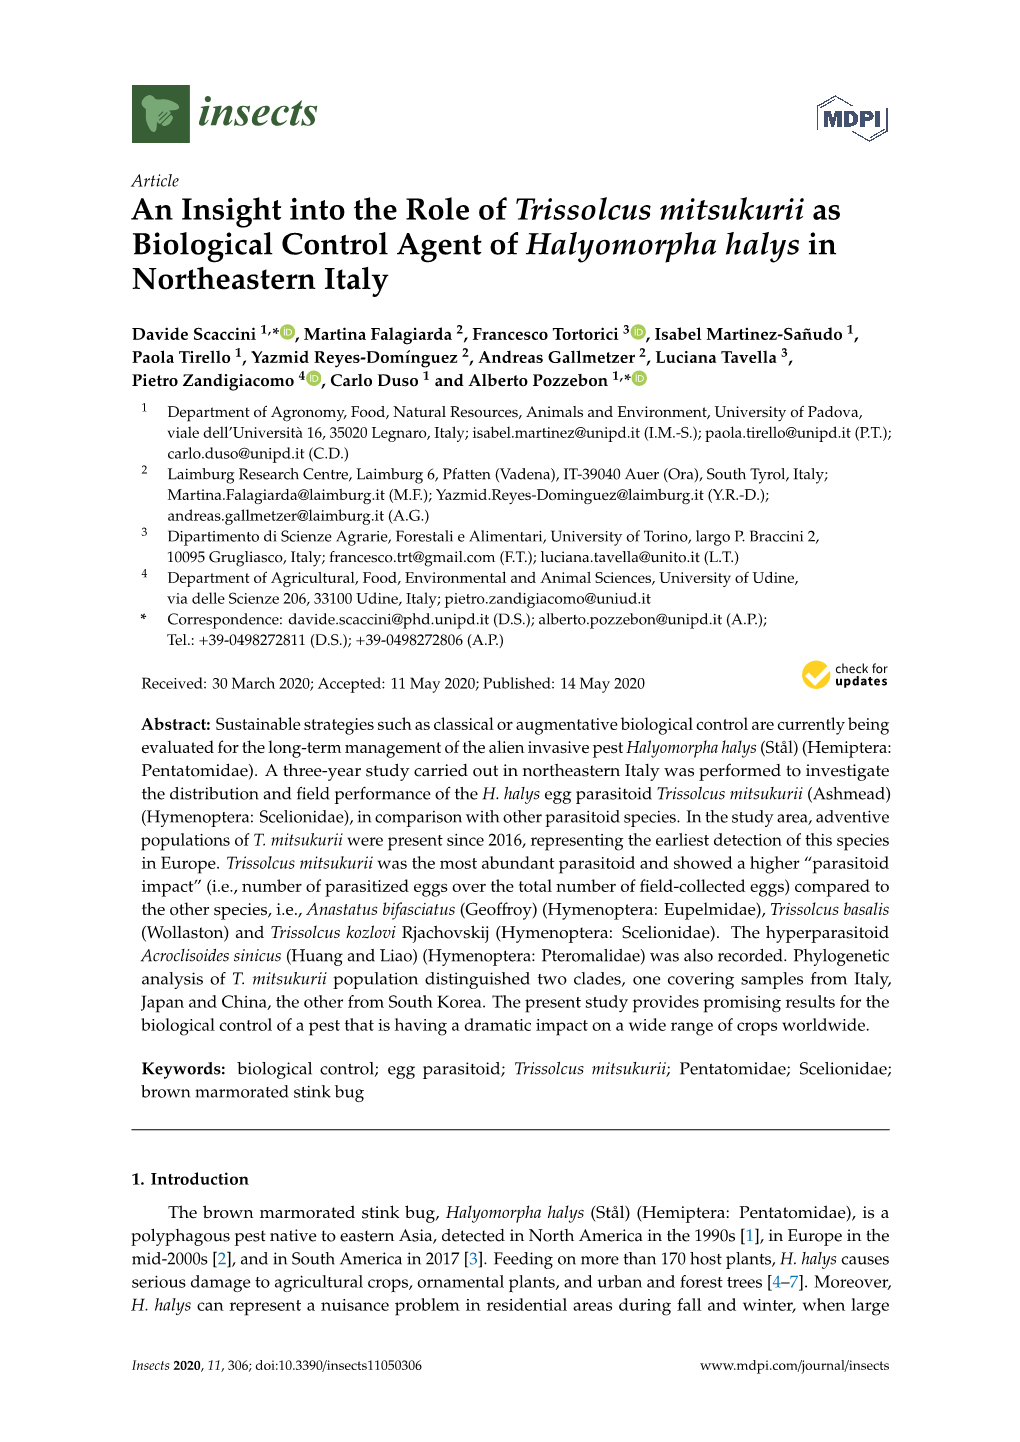 An Insight Into the Role of Trissolcus Mitsukurii As Biological Control Agent of Halyomorpha Halys in Northeastern Italy